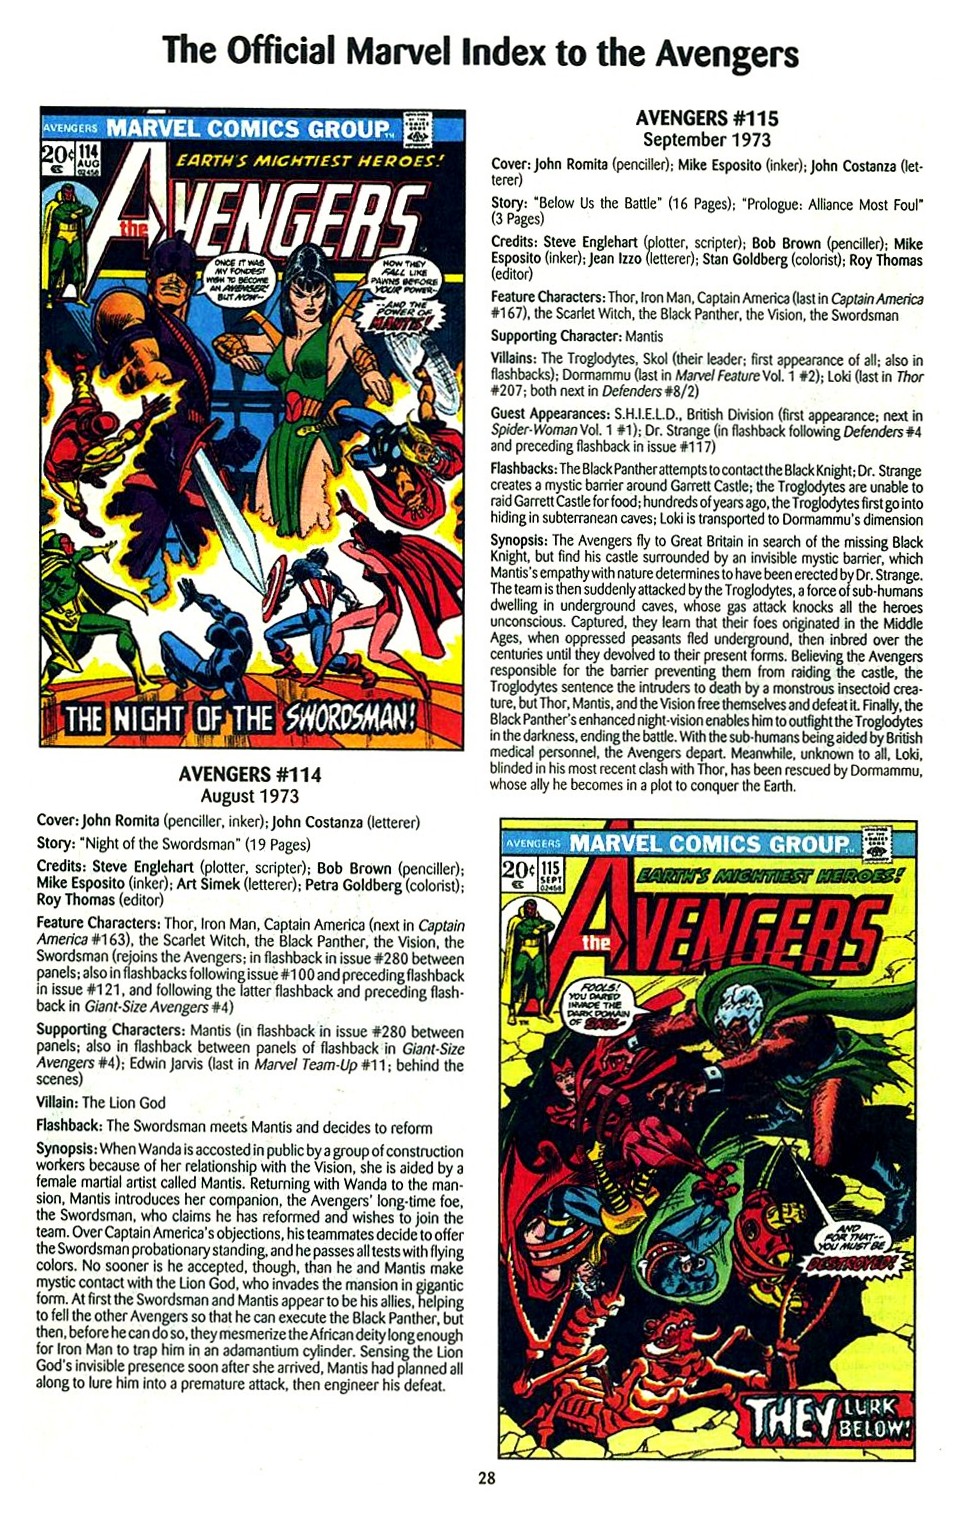 Read online The Official Marvel Index to the Avengers comic -  Issue #2 - 30